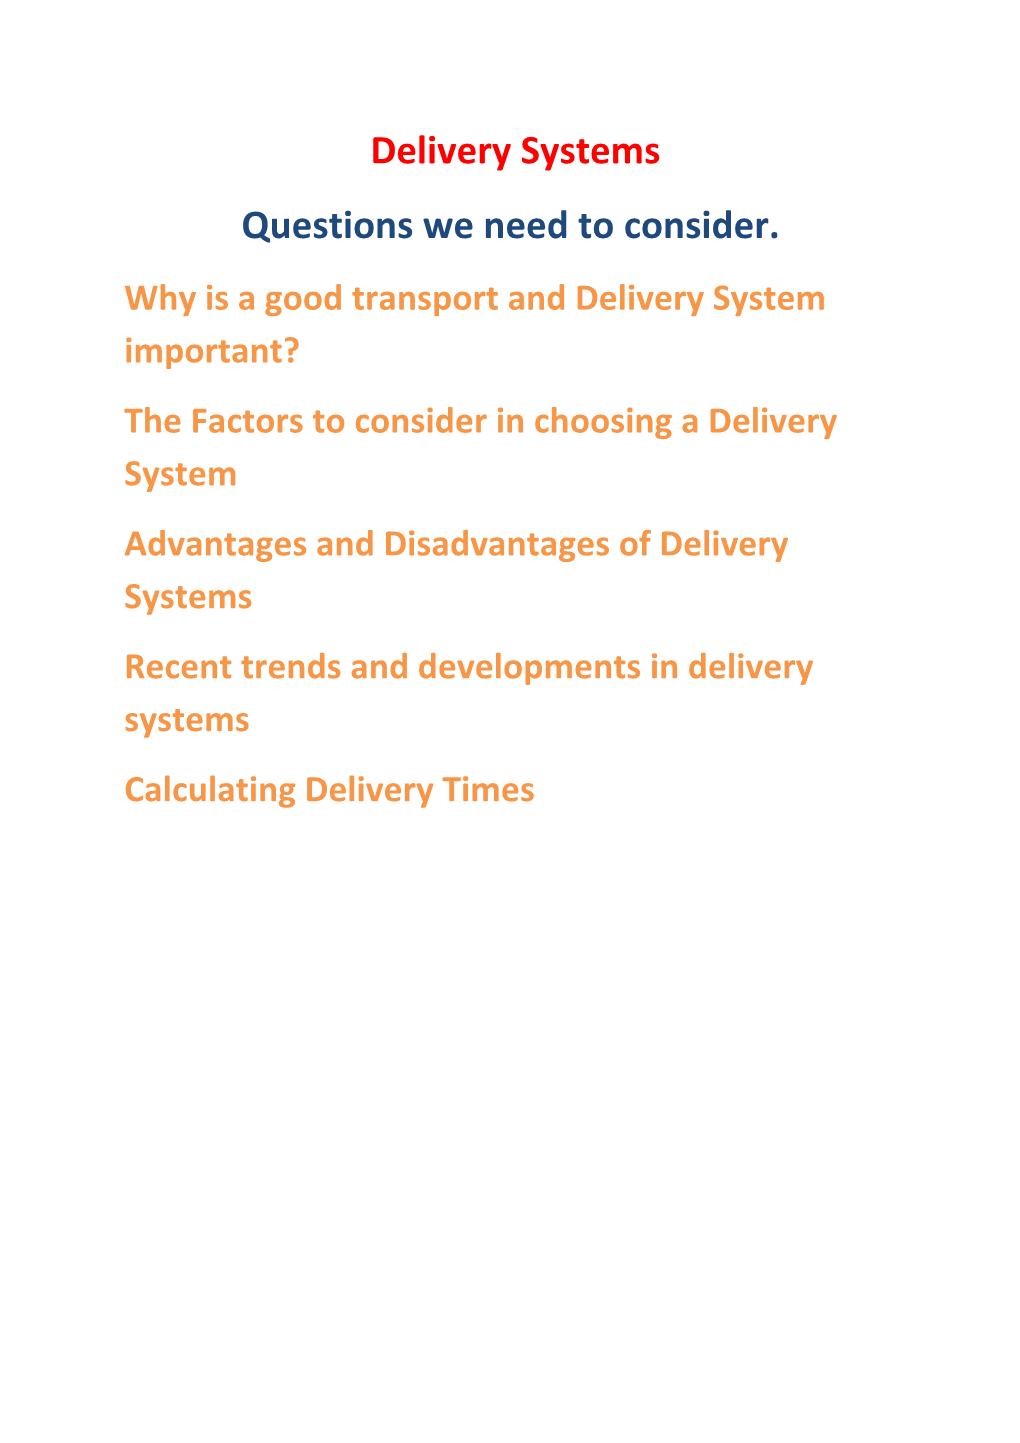 Why Is a Good Transport and Delivery System Important?